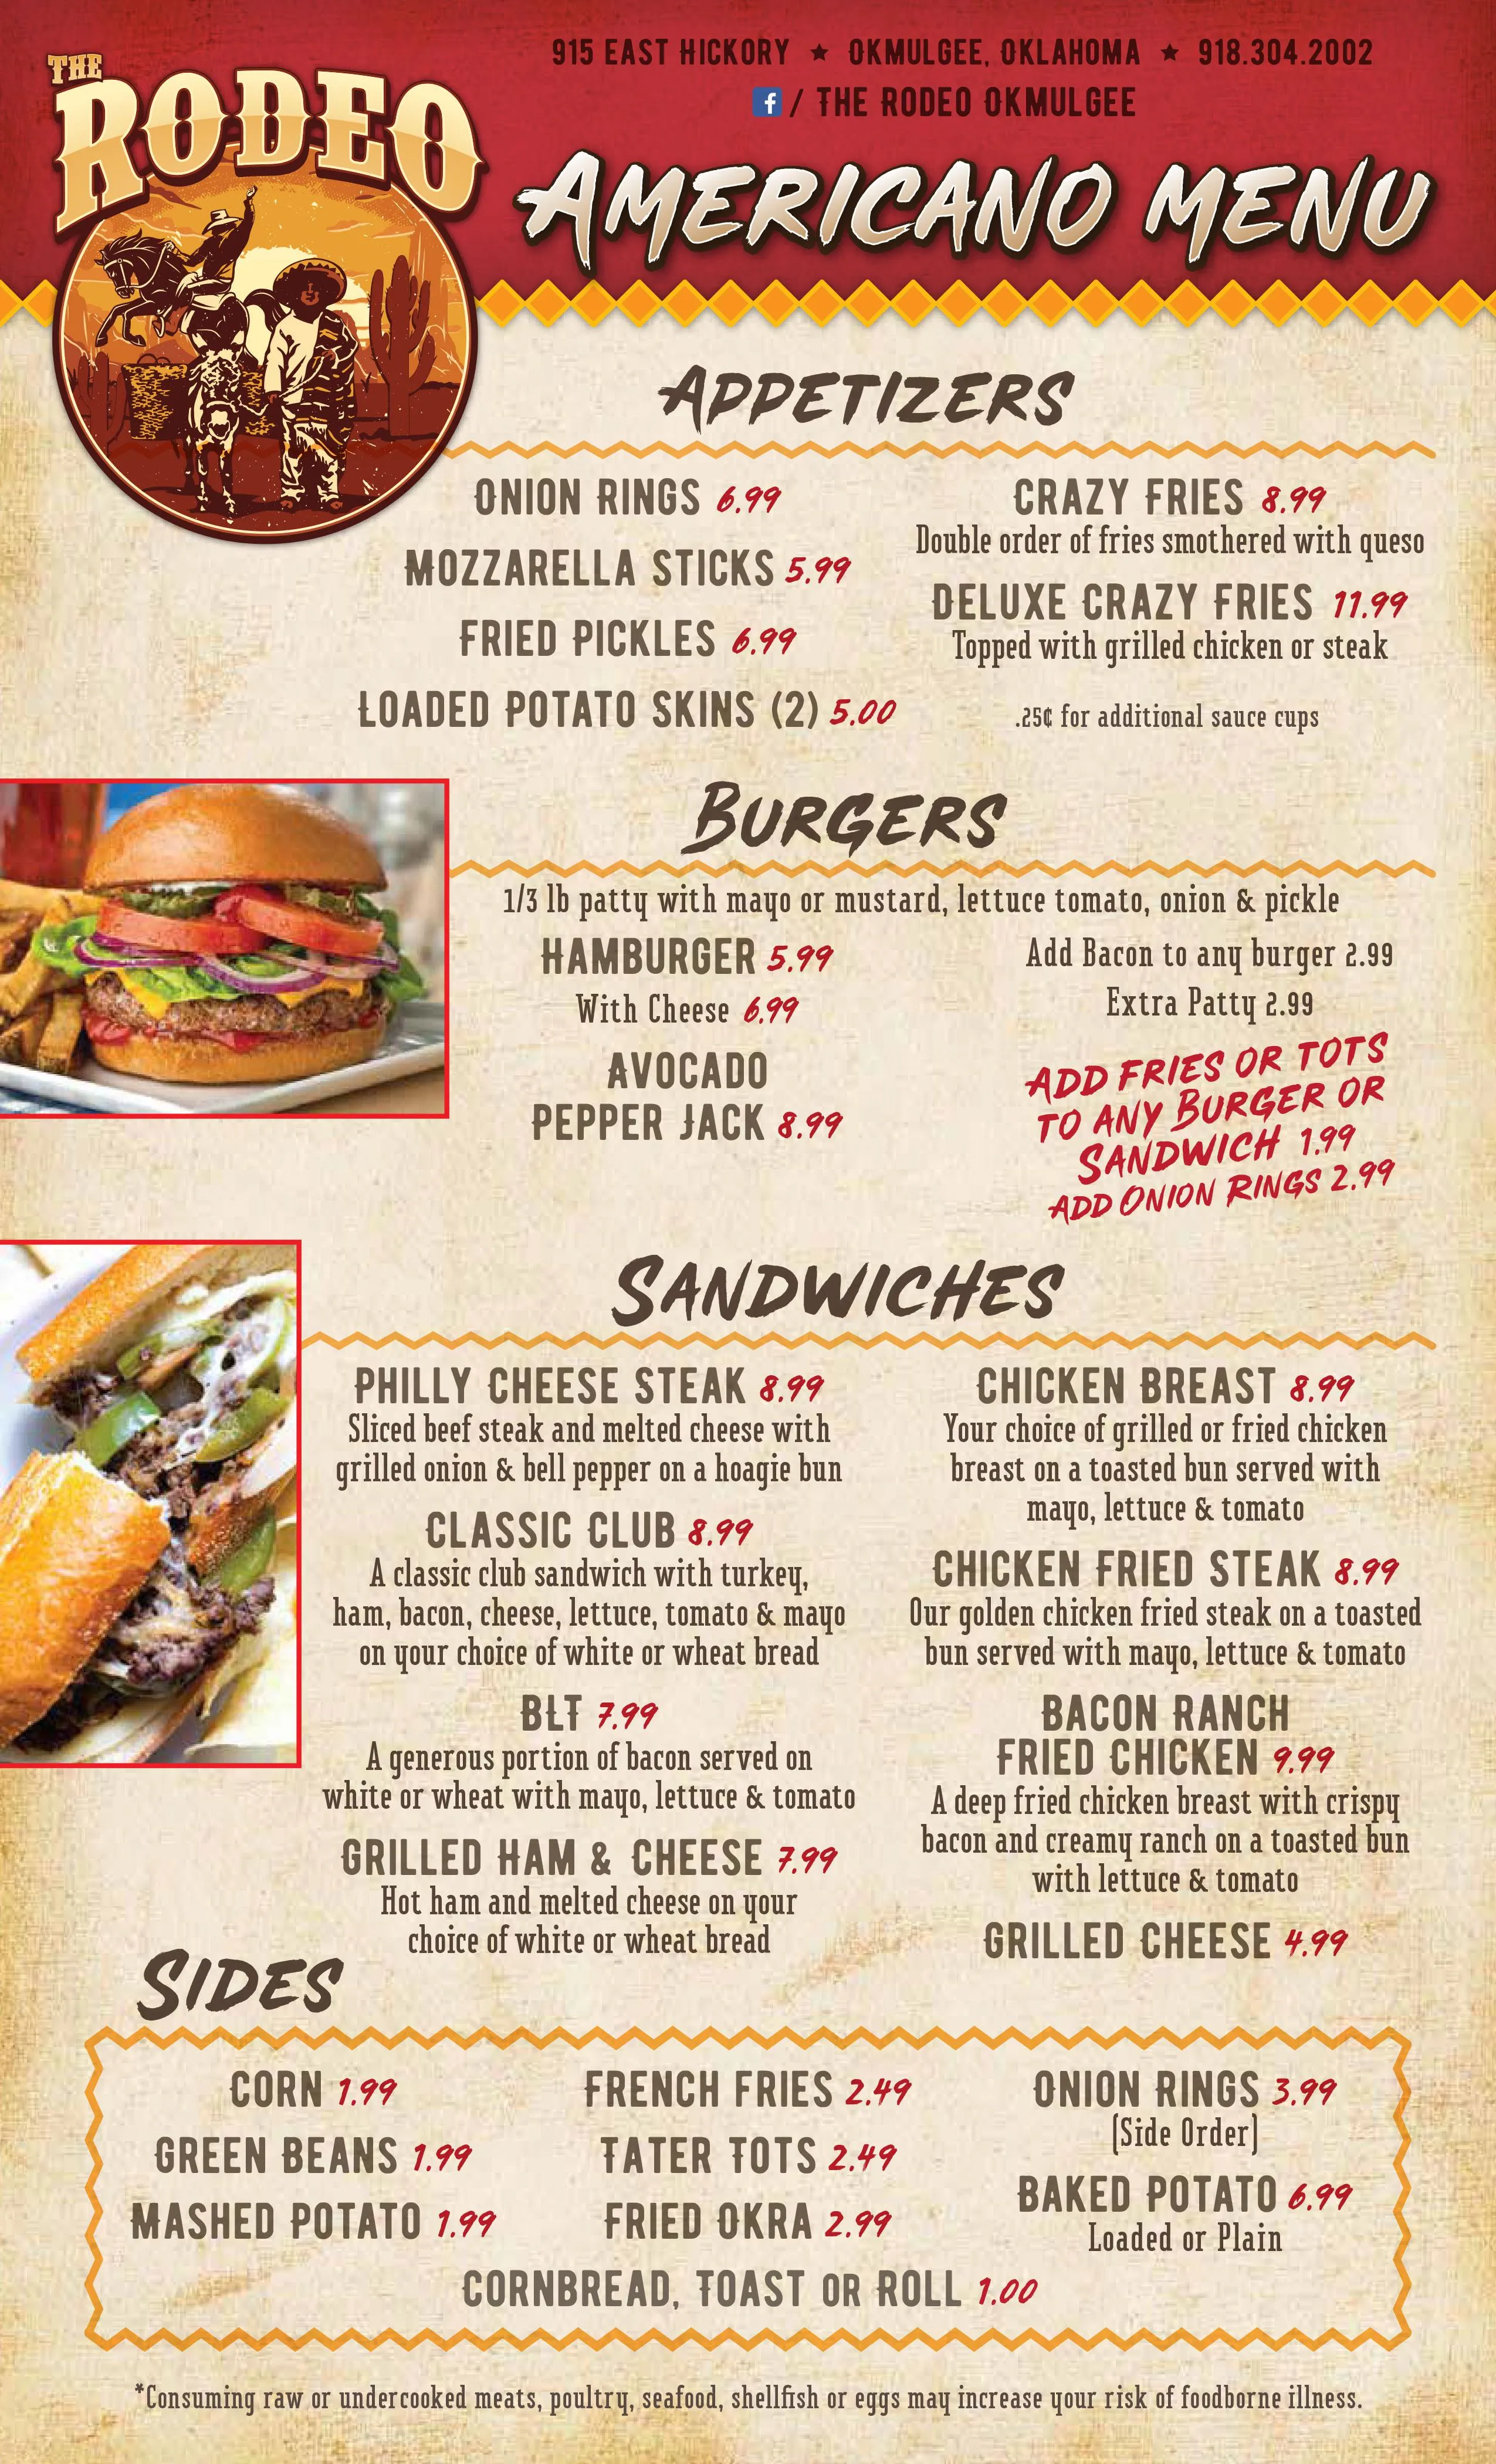 The Rodeo in Okmulgee Americano menu page with appetizers, burgers, sandwiches and sides.